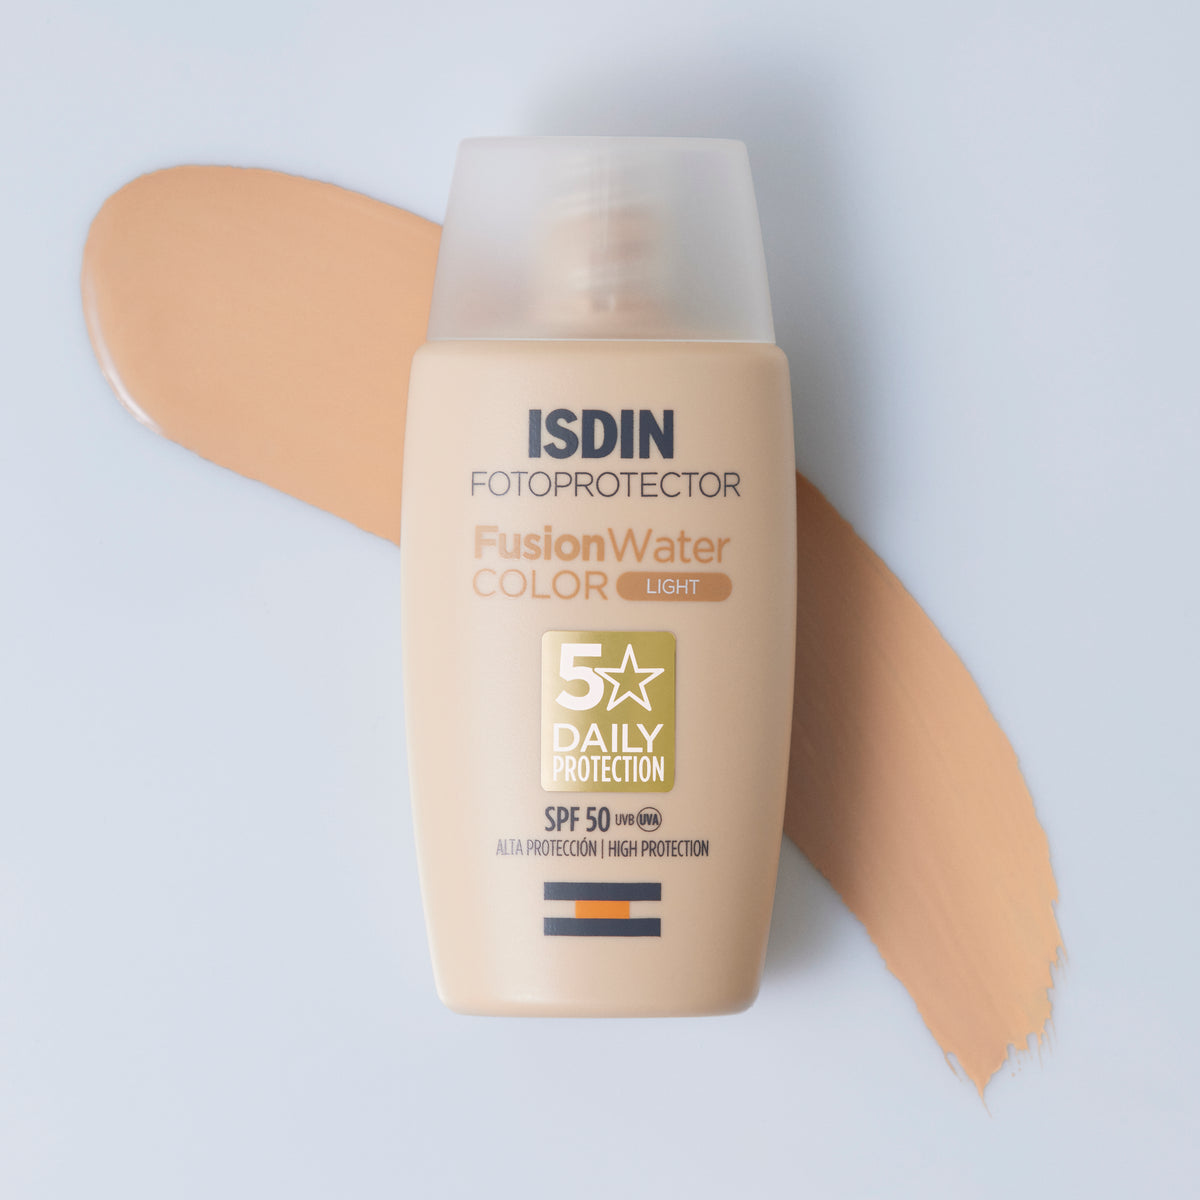 ISDIN Fotoprotector Fusion Water COLOR LSF50 LIGHT